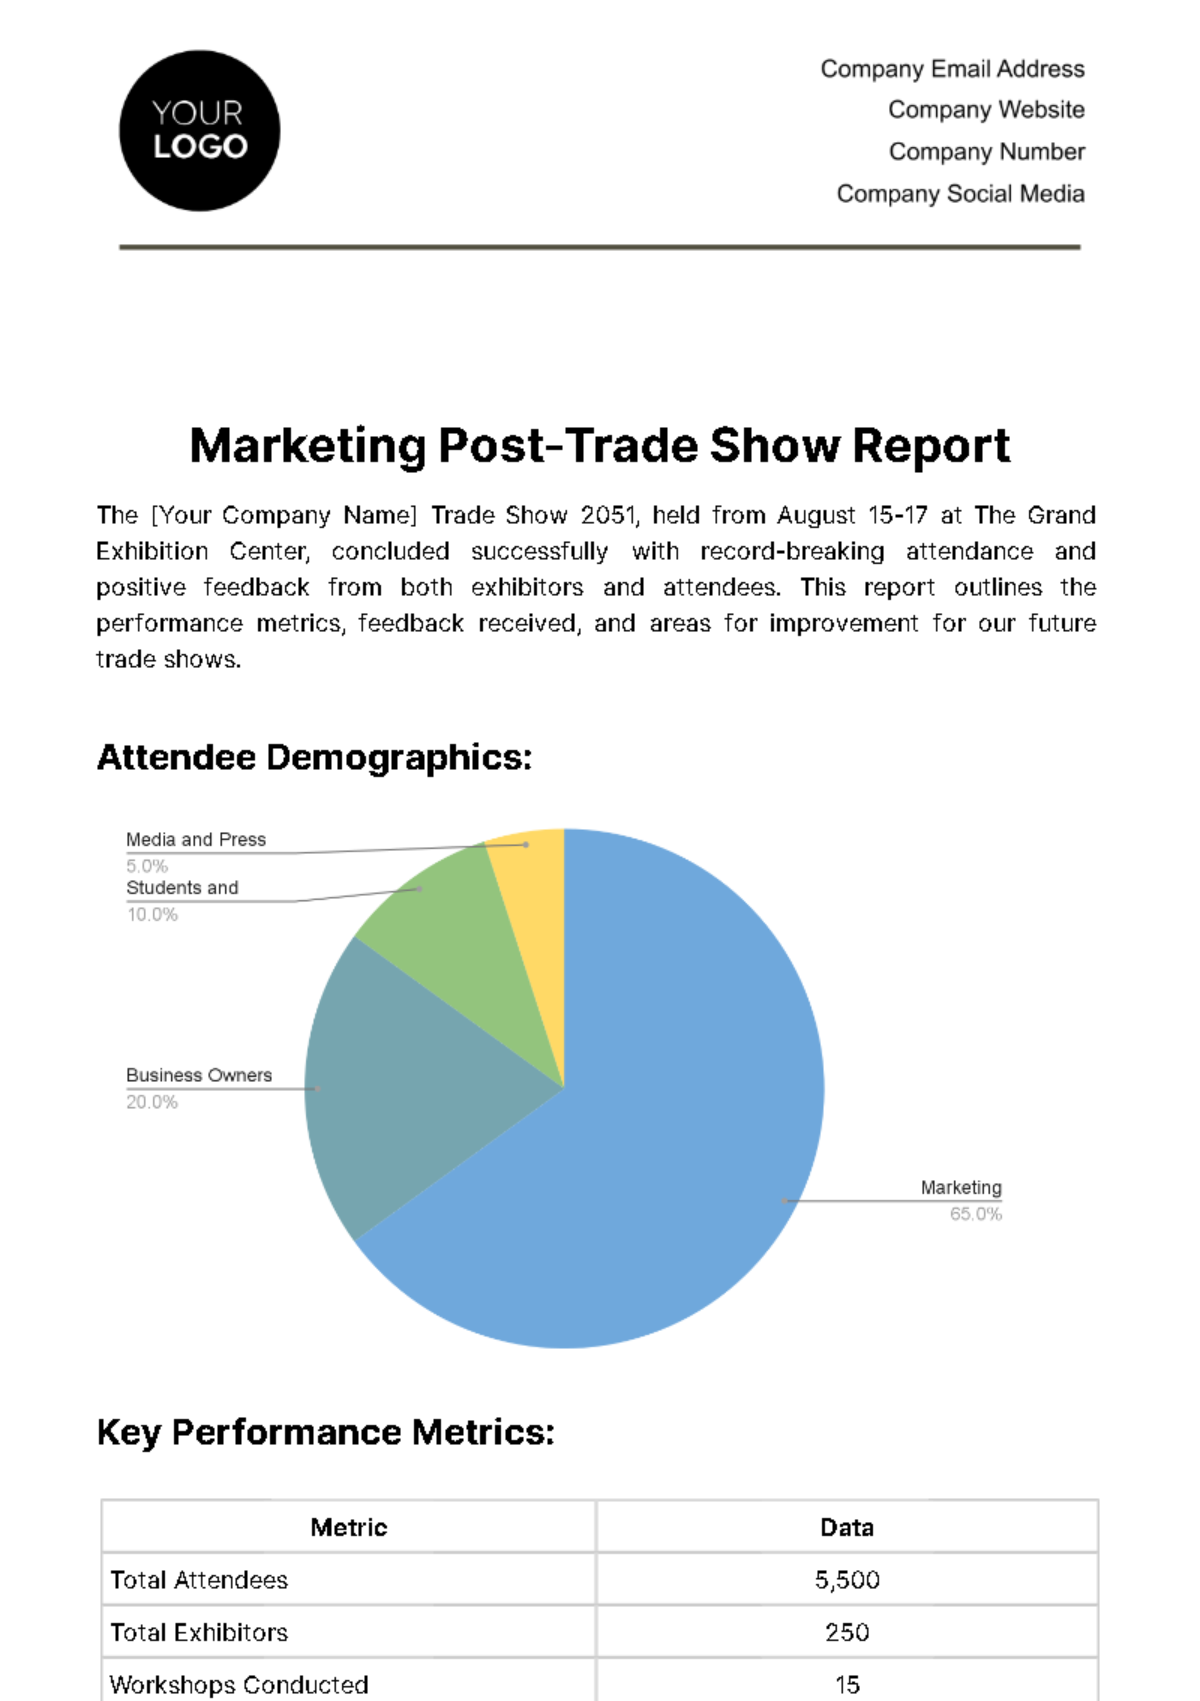 Marketing Post-Trade Show Report Template